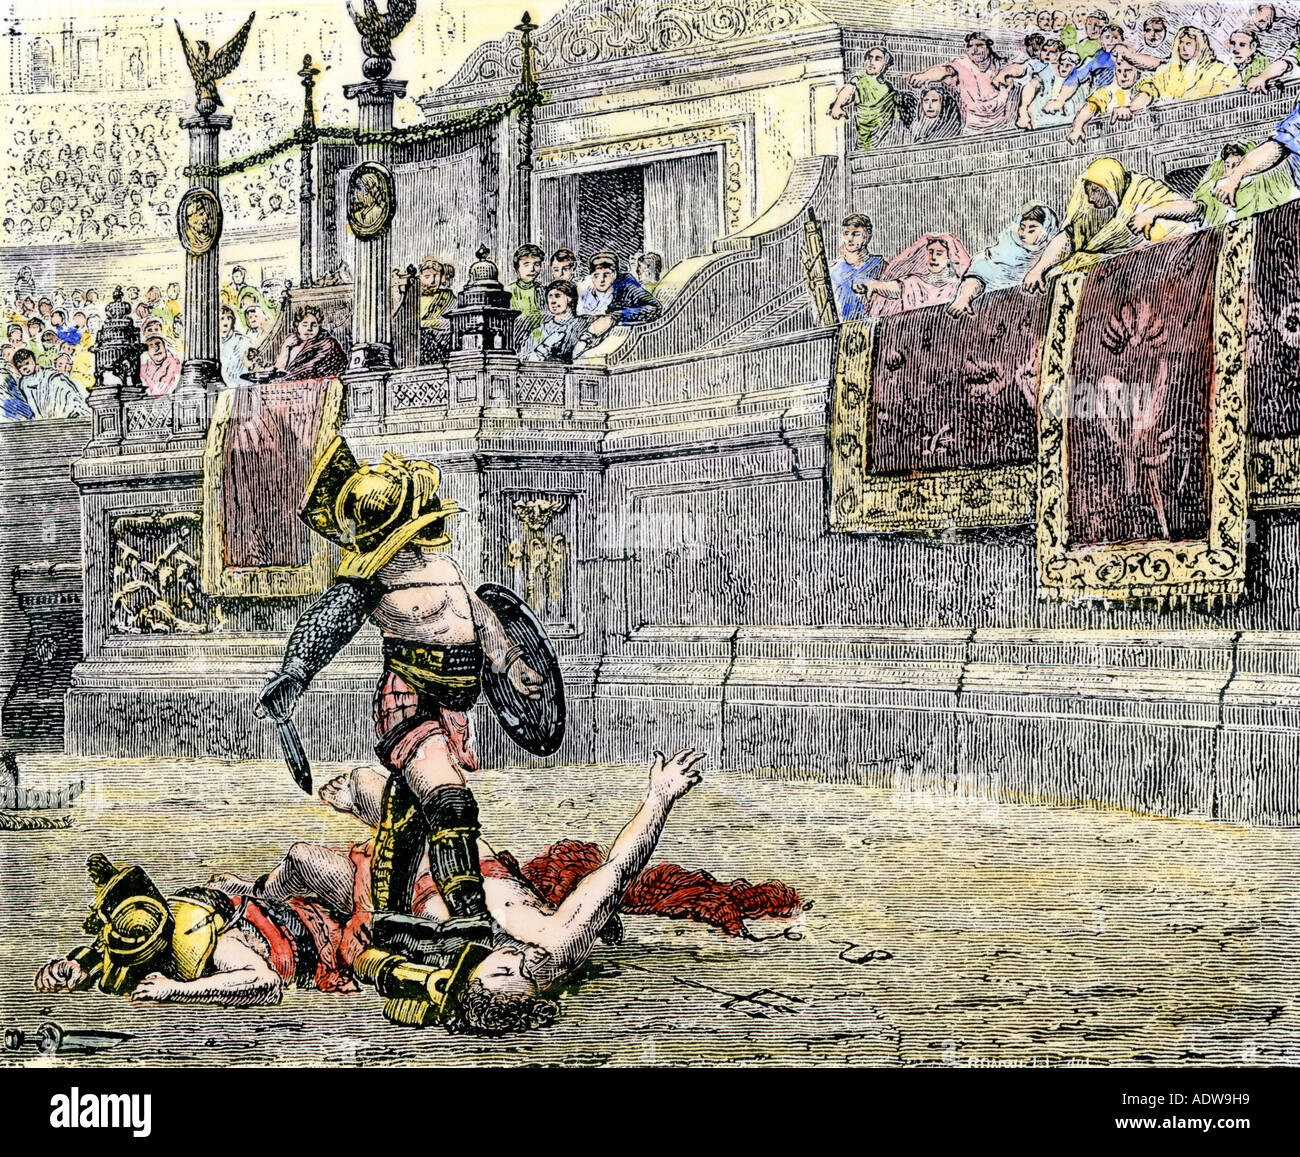 Gladiator claiming victory after combat in an arena of ancient Rome. Hand-colored woodcut Stock Photo